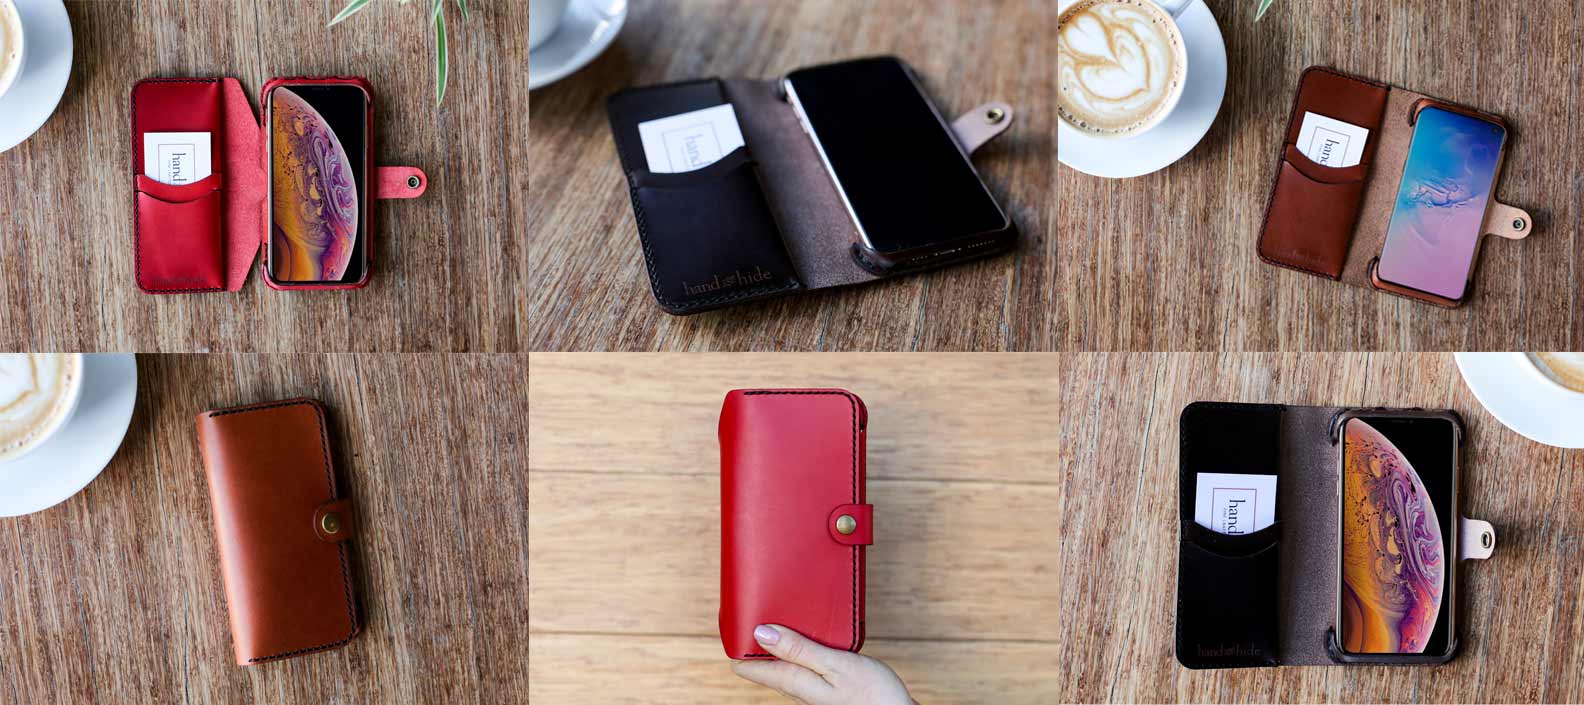 Hand and Hide Custom iPhone 11 Pro Max Wallet Phone Case - Hand and Hide LLC